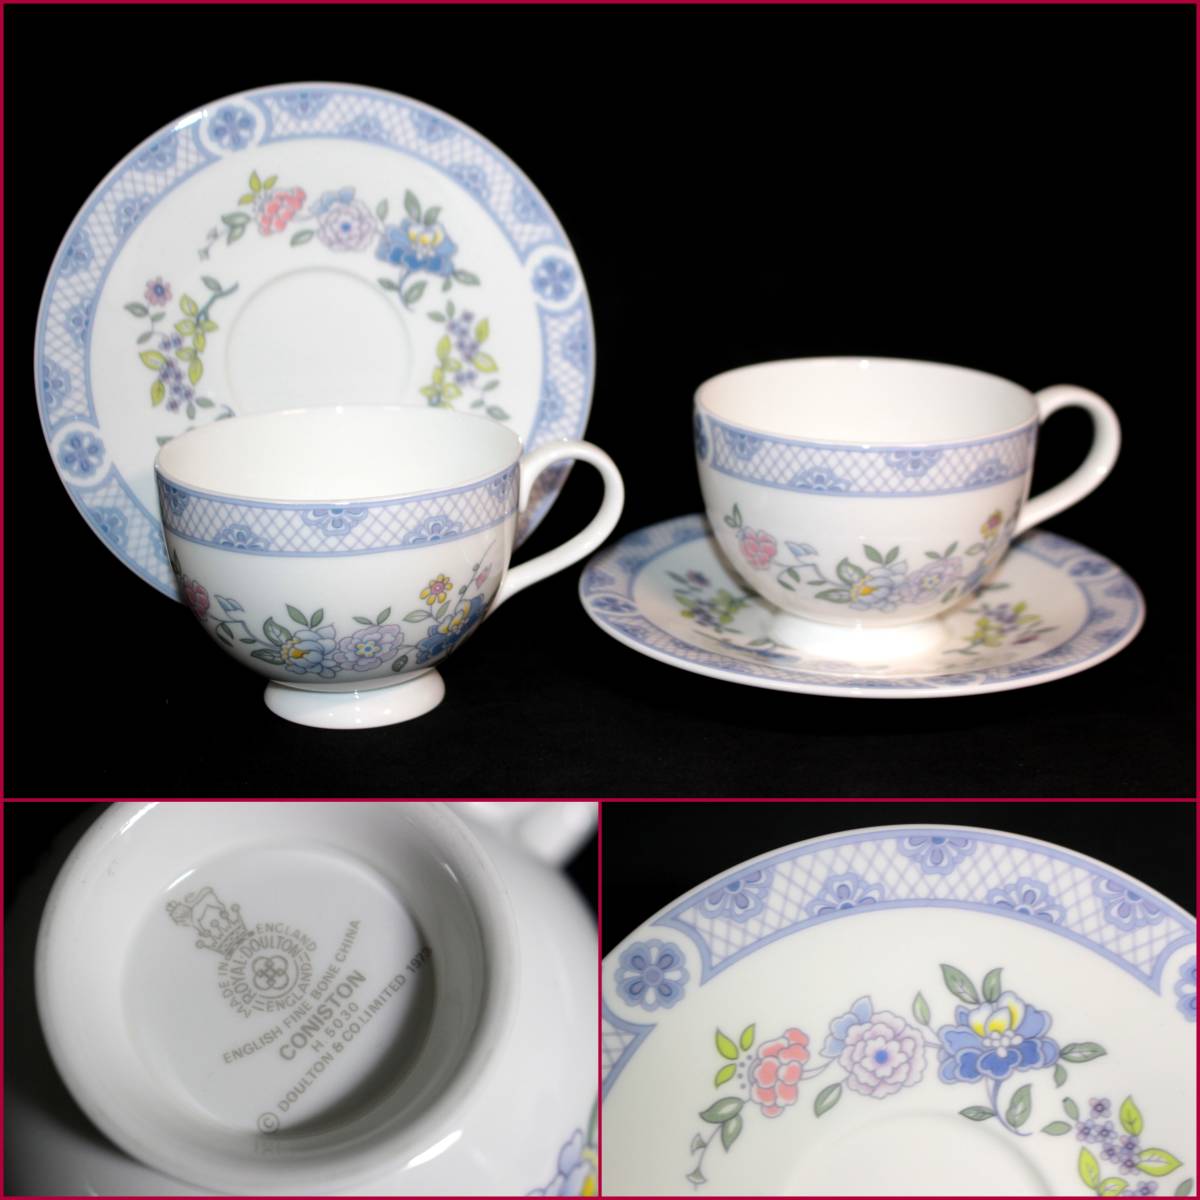 [ ROYAL DOULTON/ Royal Doulton ]CONISTON[ KONI stone * pair cup & saucer ]{ condition is excellent } England /2 customer / high class / floral print //BVT2723